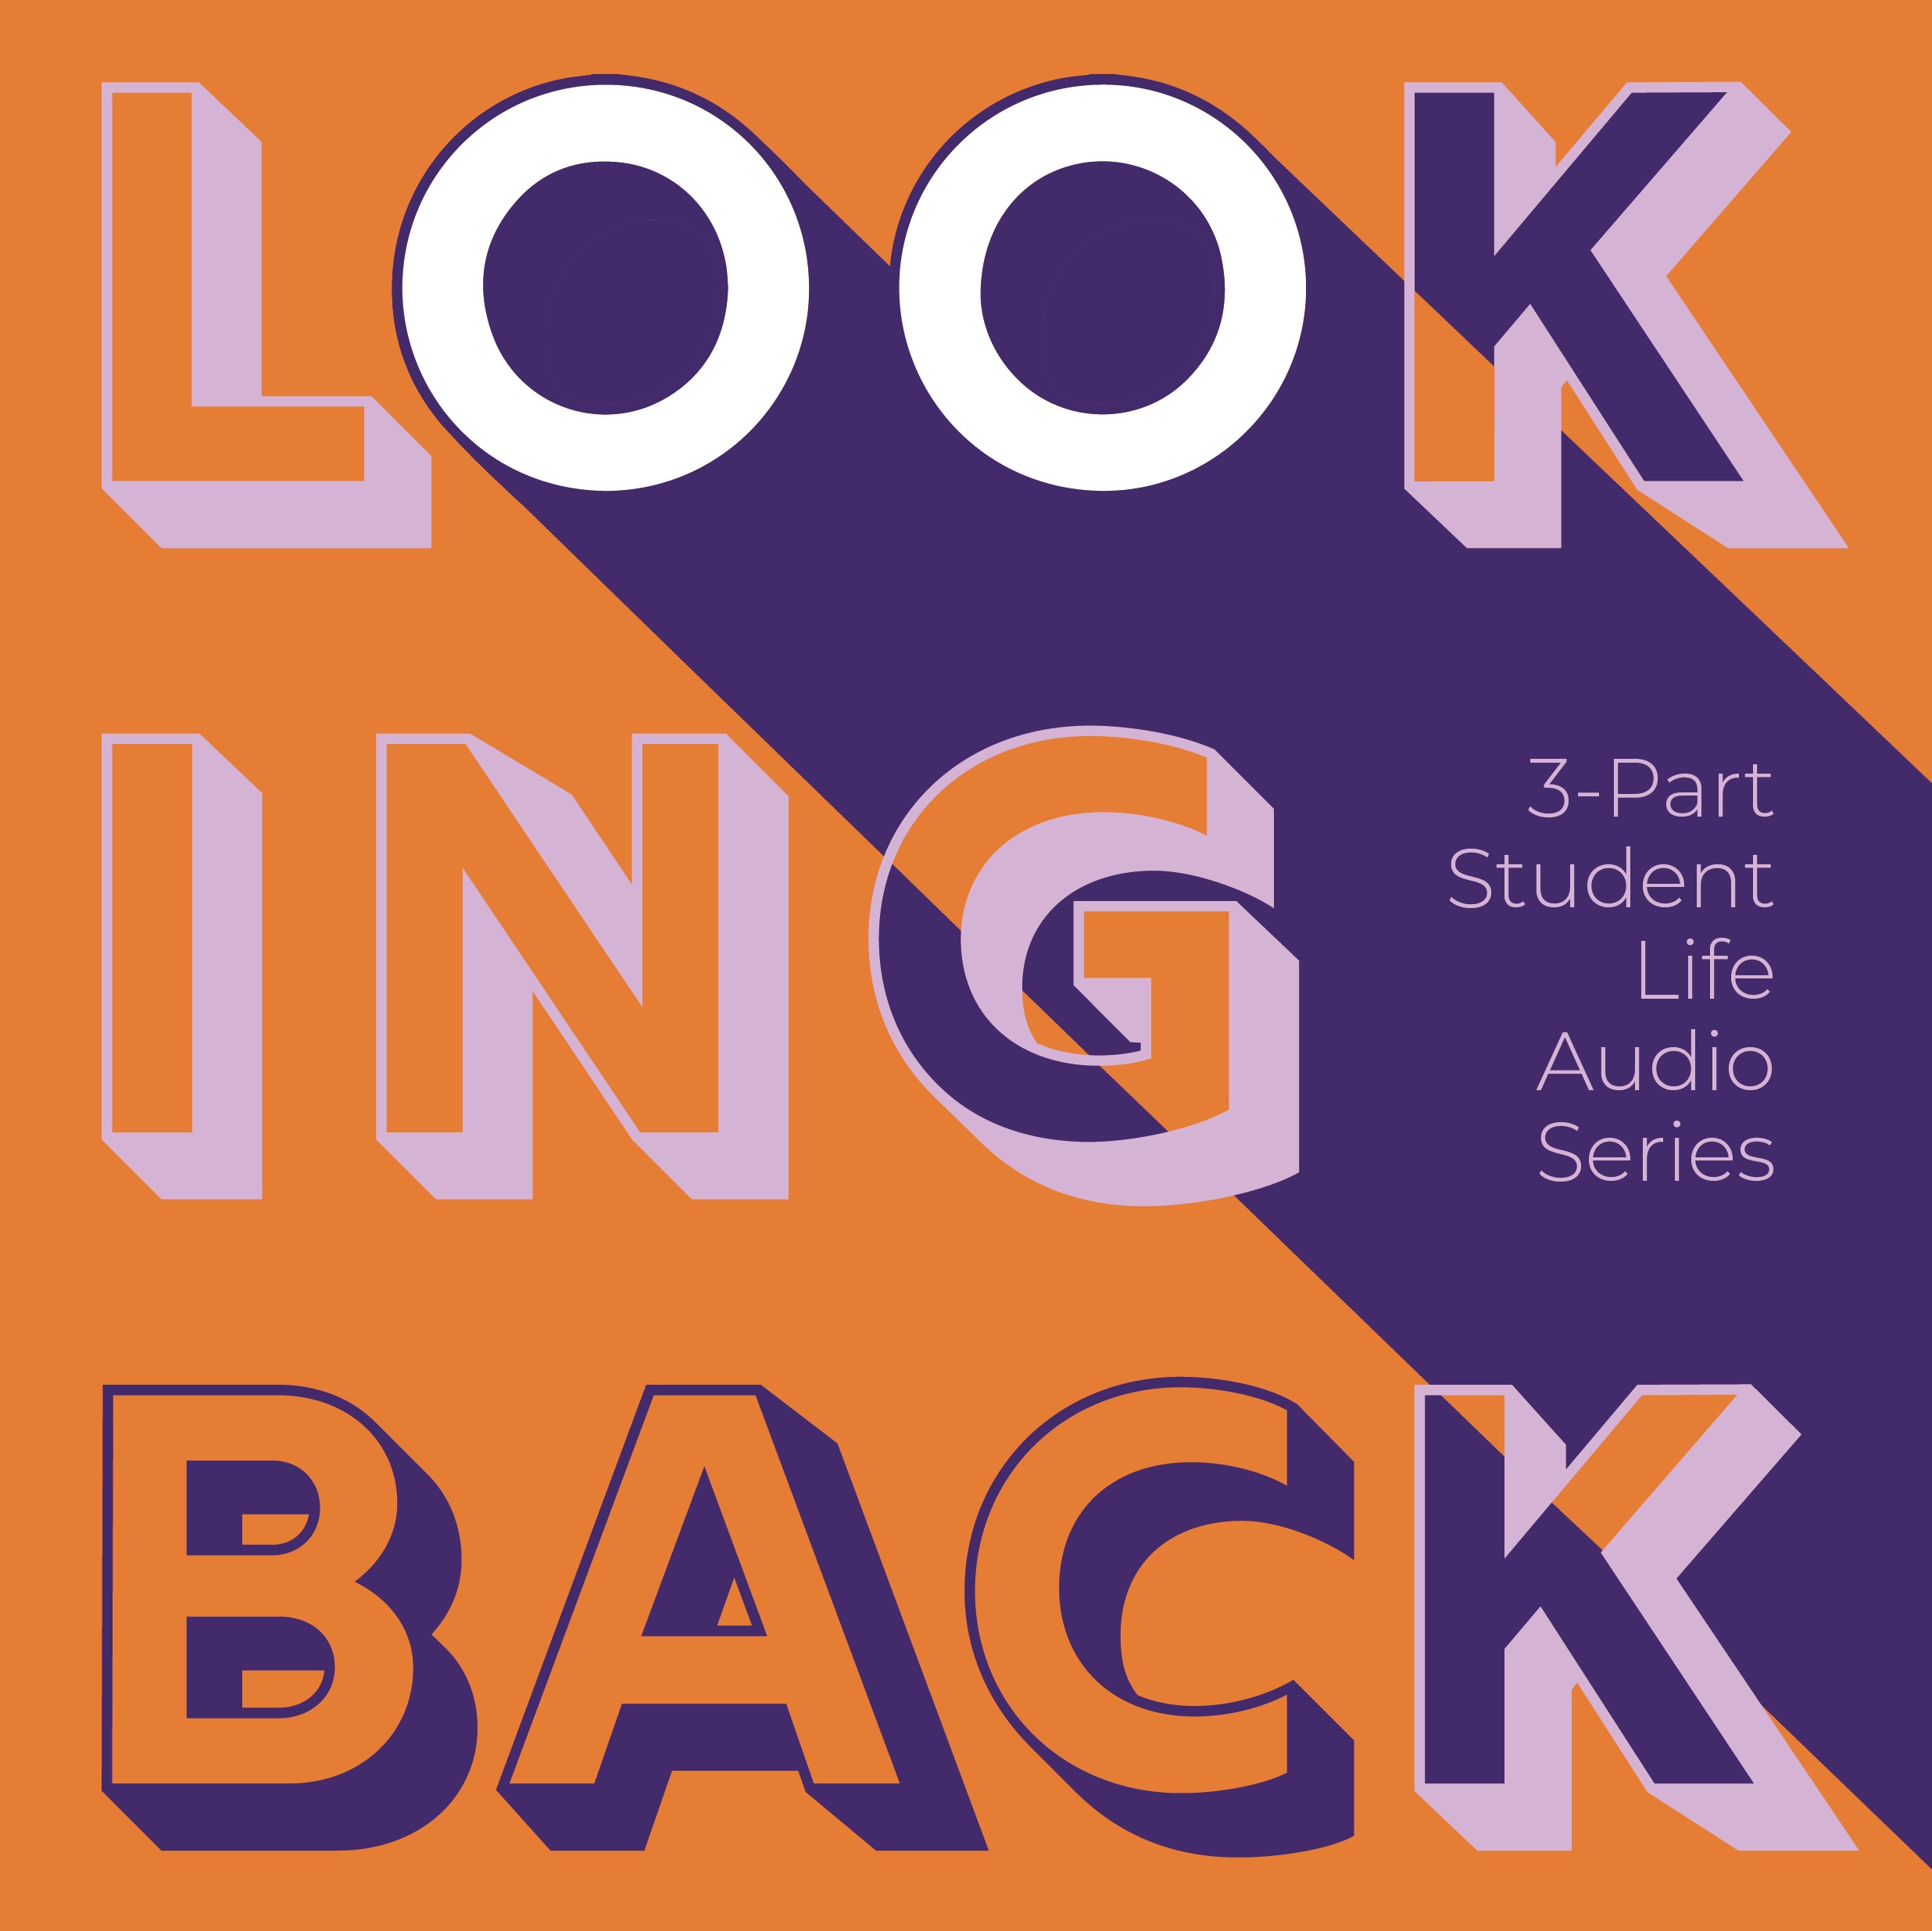 The words "Looking Back" spread across three horizontal lines in orange and purple colors. On the right side, smaller purple text reads "3-Part Student Life Audio Series." A purple trapezoid from the right side of the screen makes the two Os in the word "Look" appear like eyes.